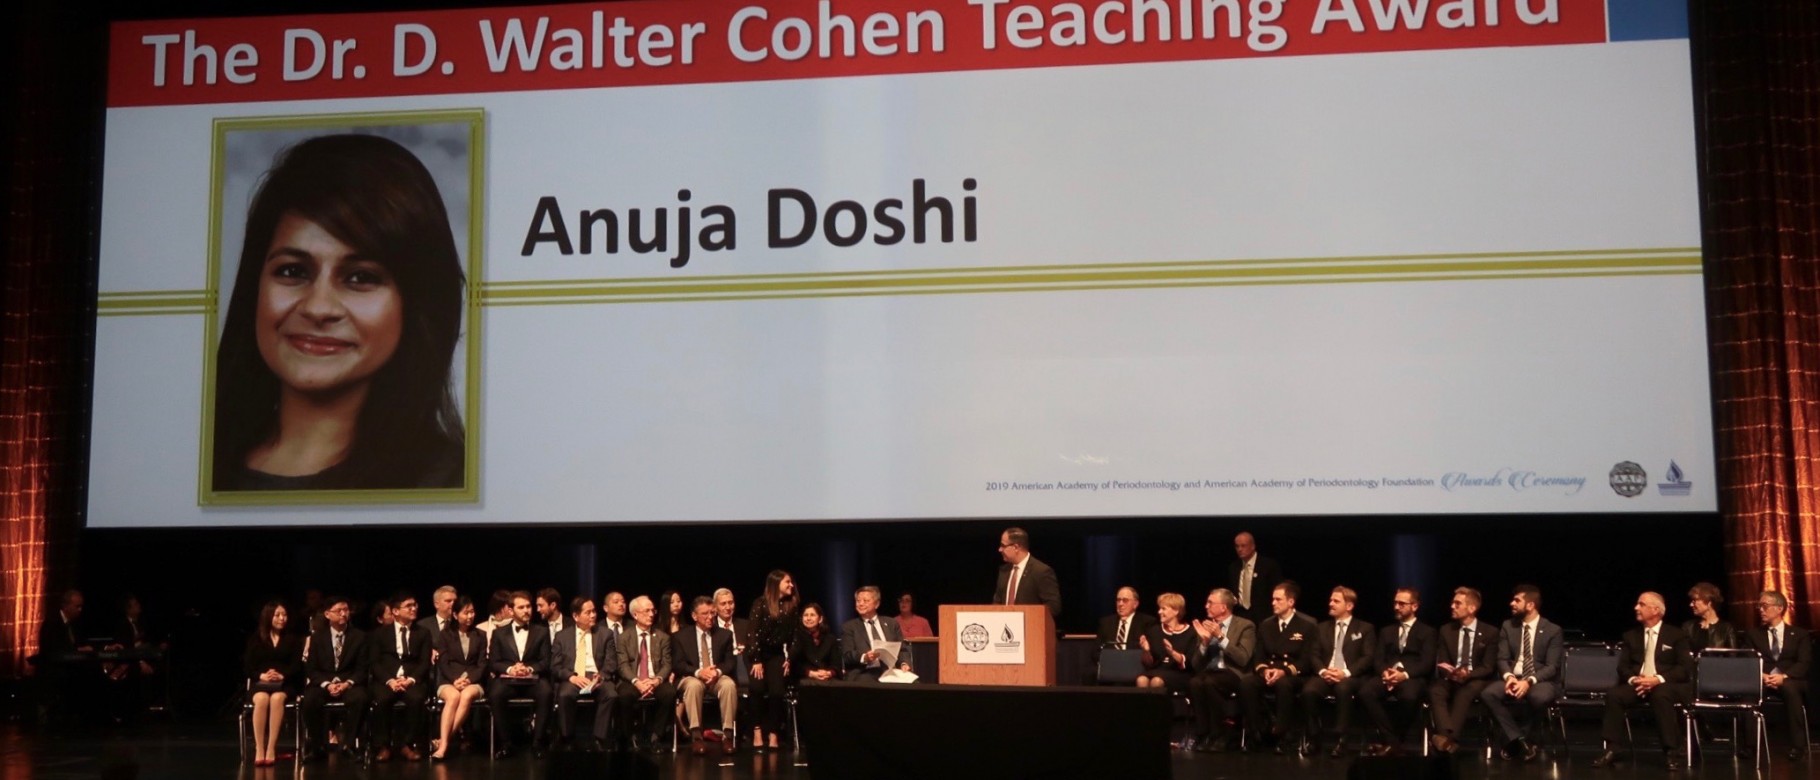 Anuja Doshi received the Dr. D. Walter Cohen Teaching Award in Chicago, Illinois